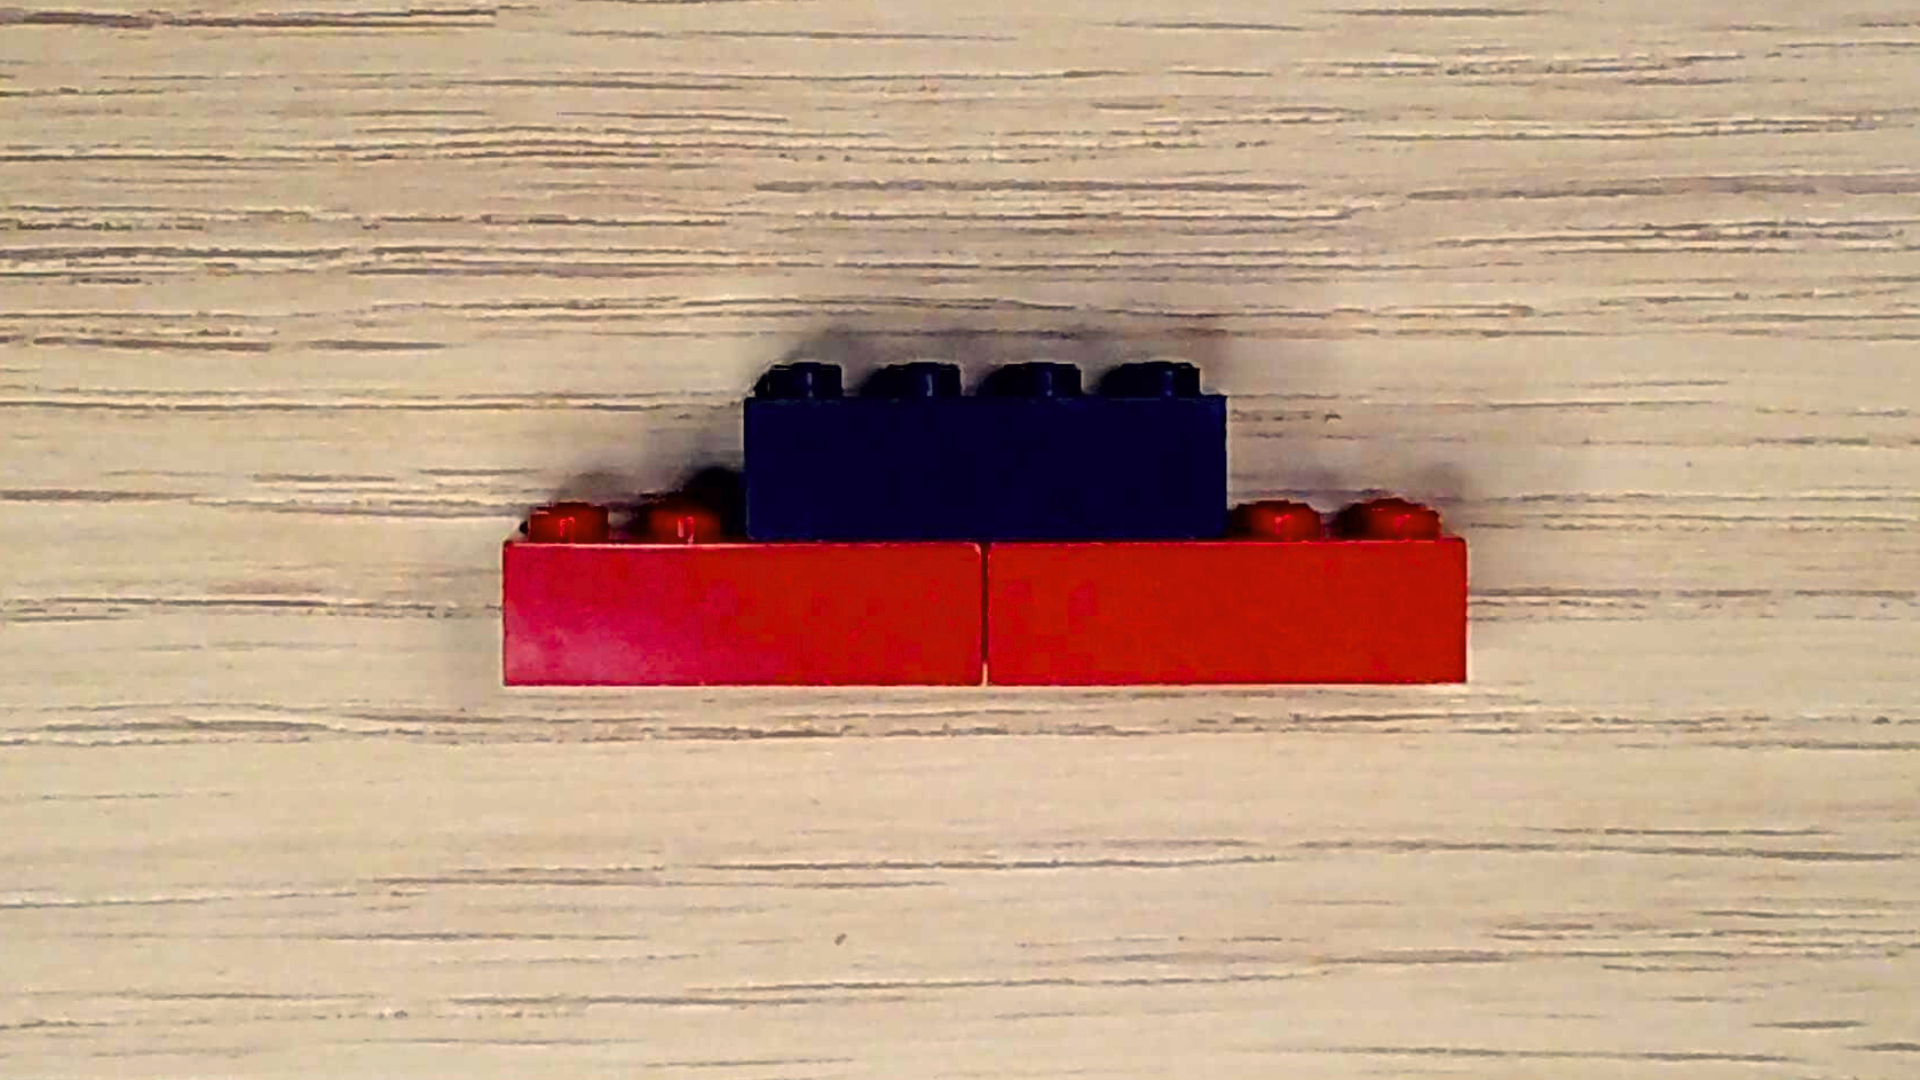 Two red 2x4 plastic bricks with on black 2x4 brick attached to the top, bridging the red bricks.